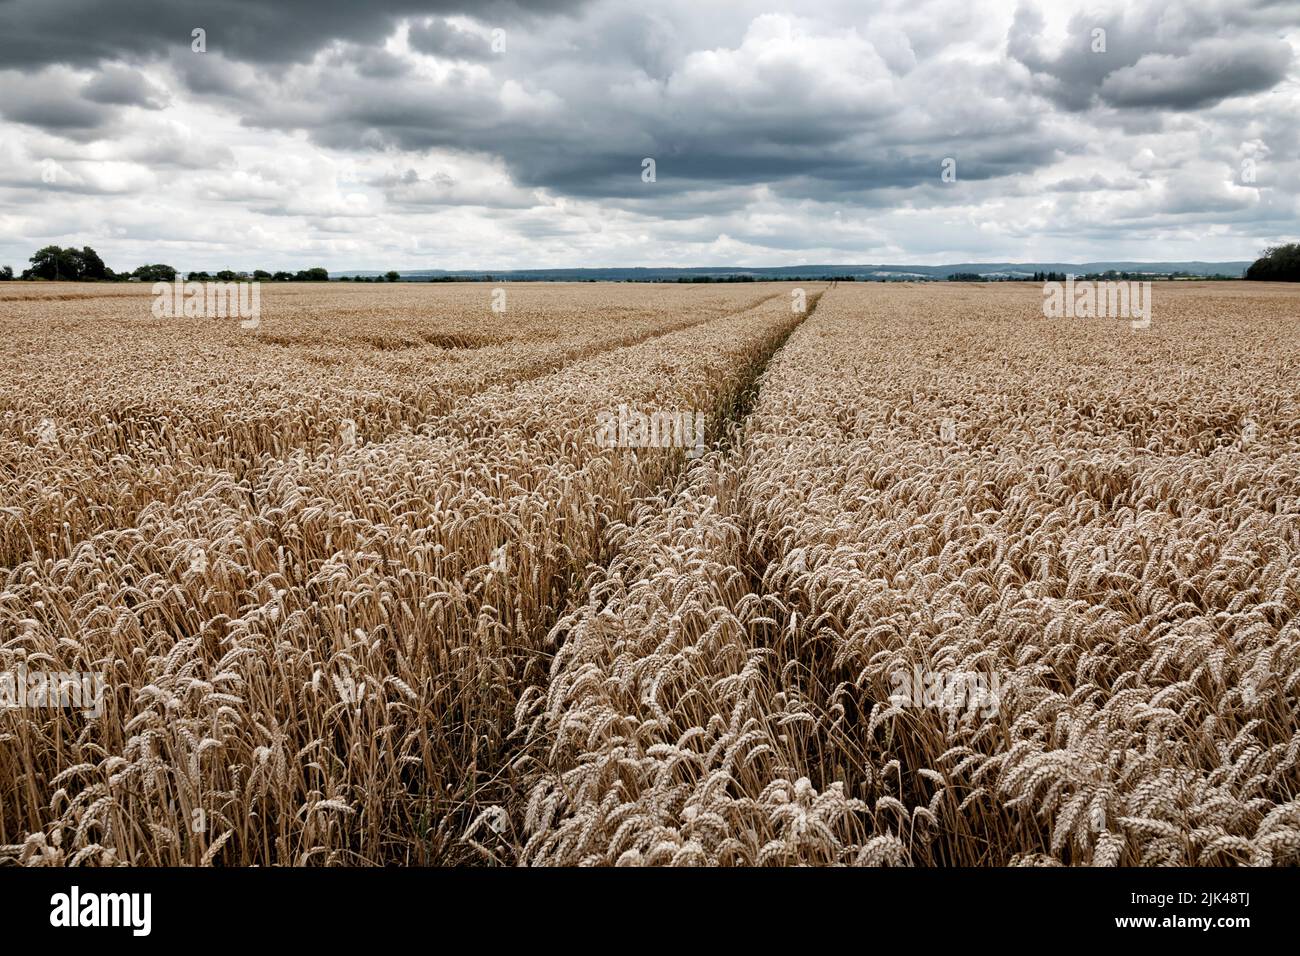 Whet field in Ukraine under a dark cloudy sky. A concept of the food crisis and the danger of hunger due to the russian war. Stock Photo